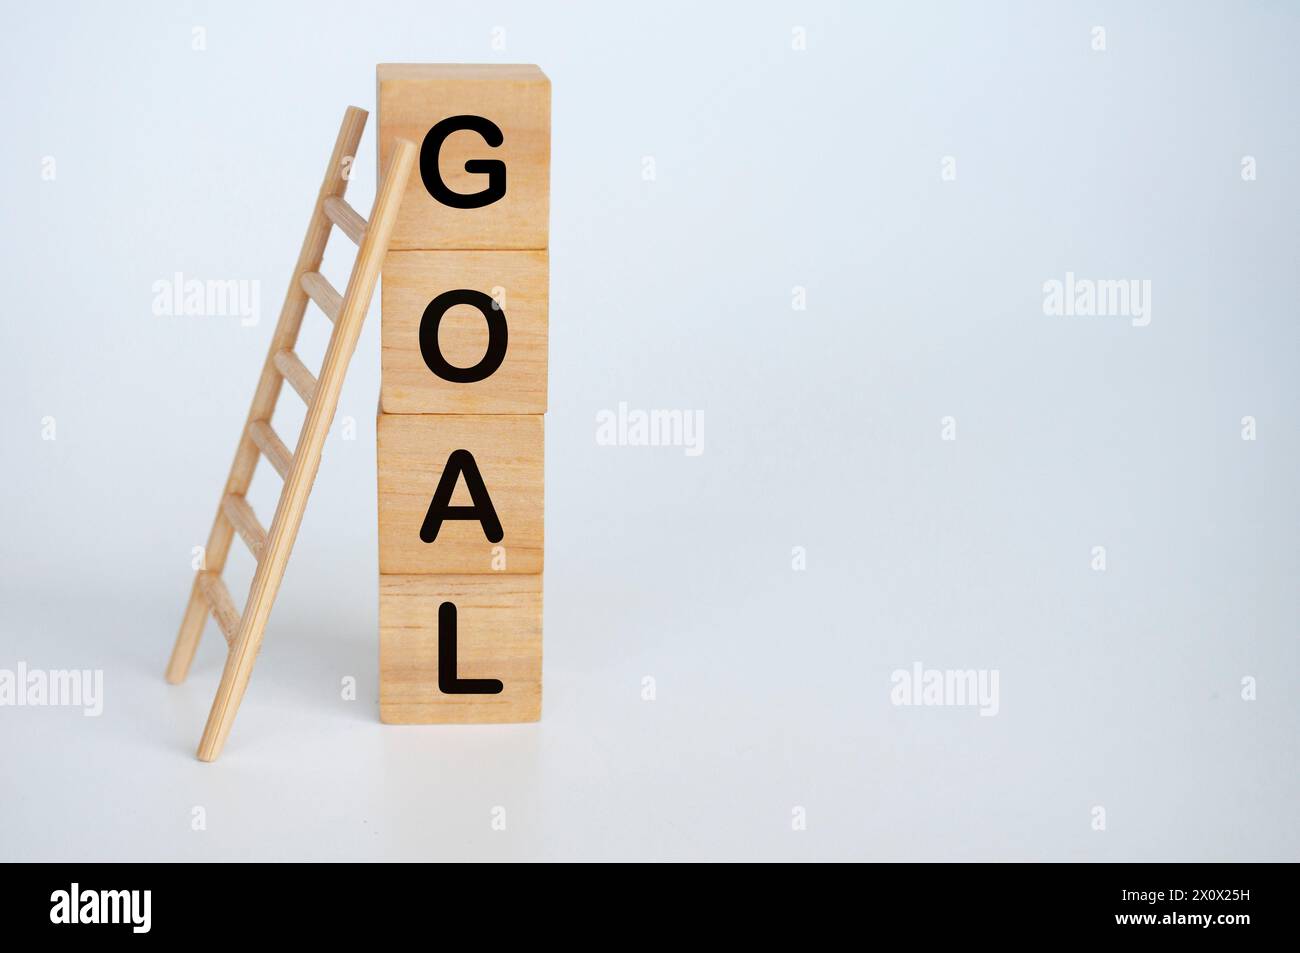 Goal text on wooden cubes with ladder on white background. Stock Photo